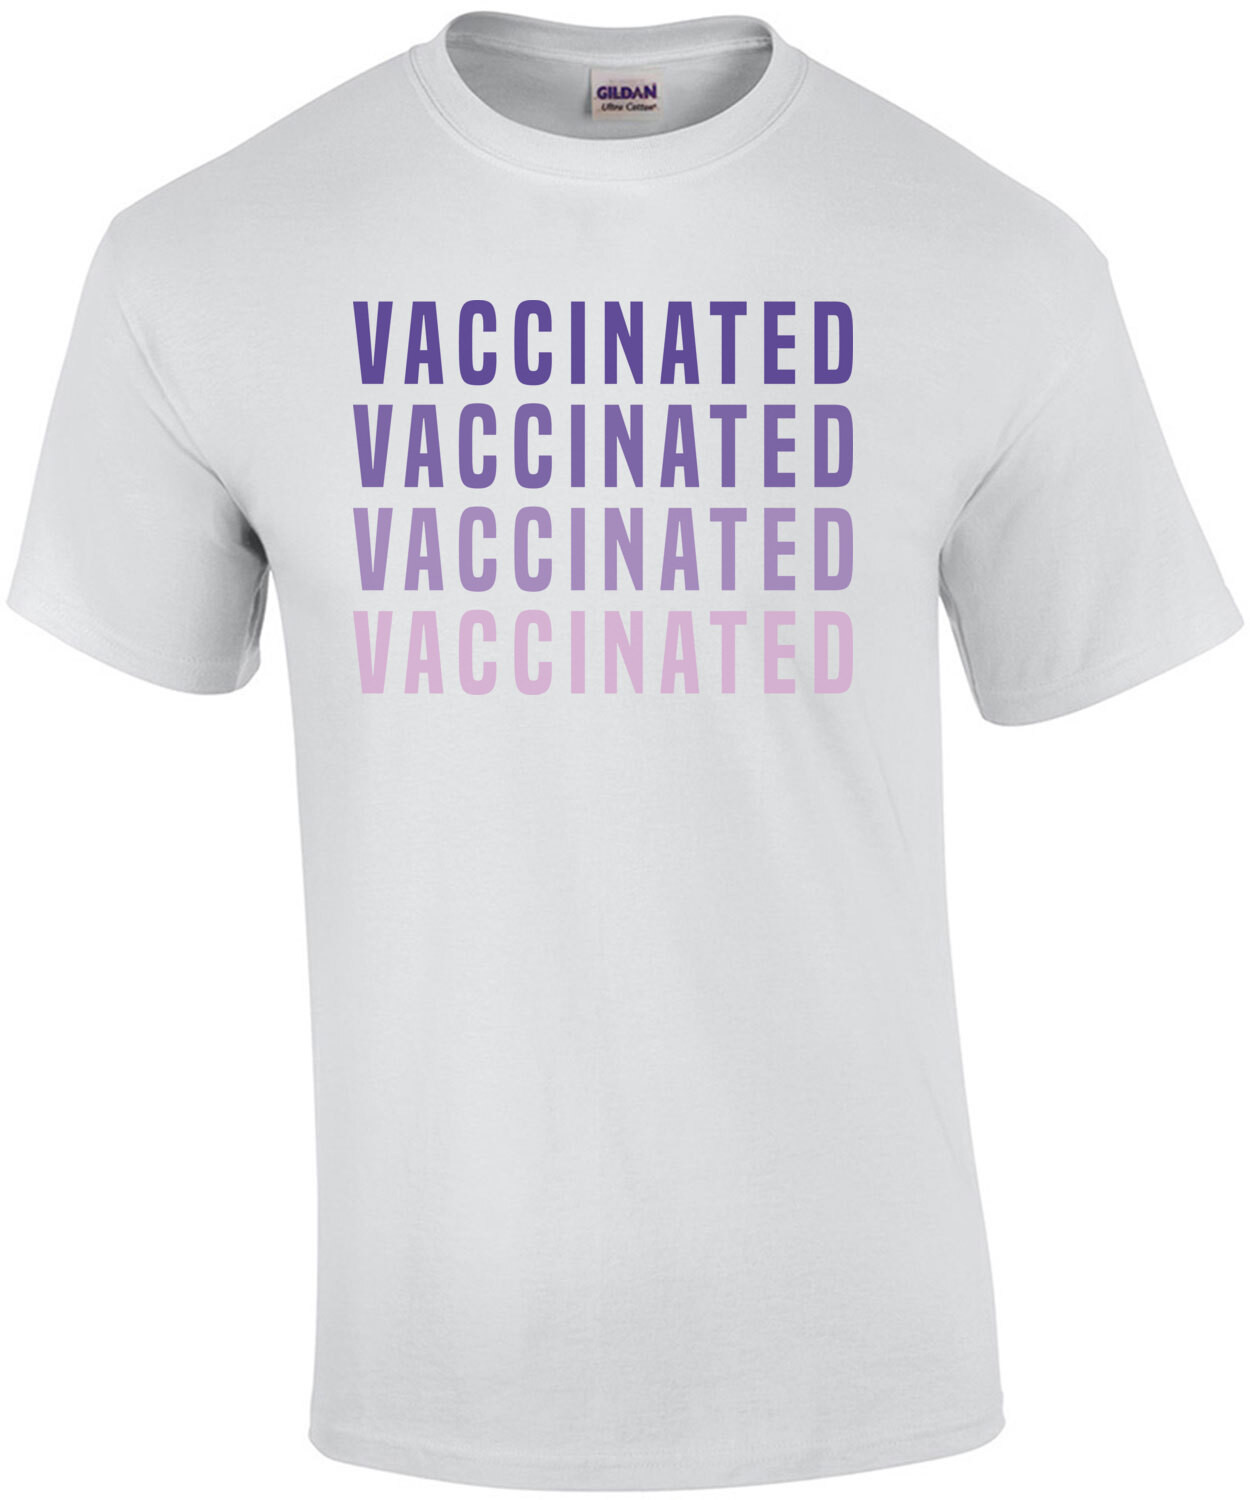 Vaccinated X4 T-Shirt